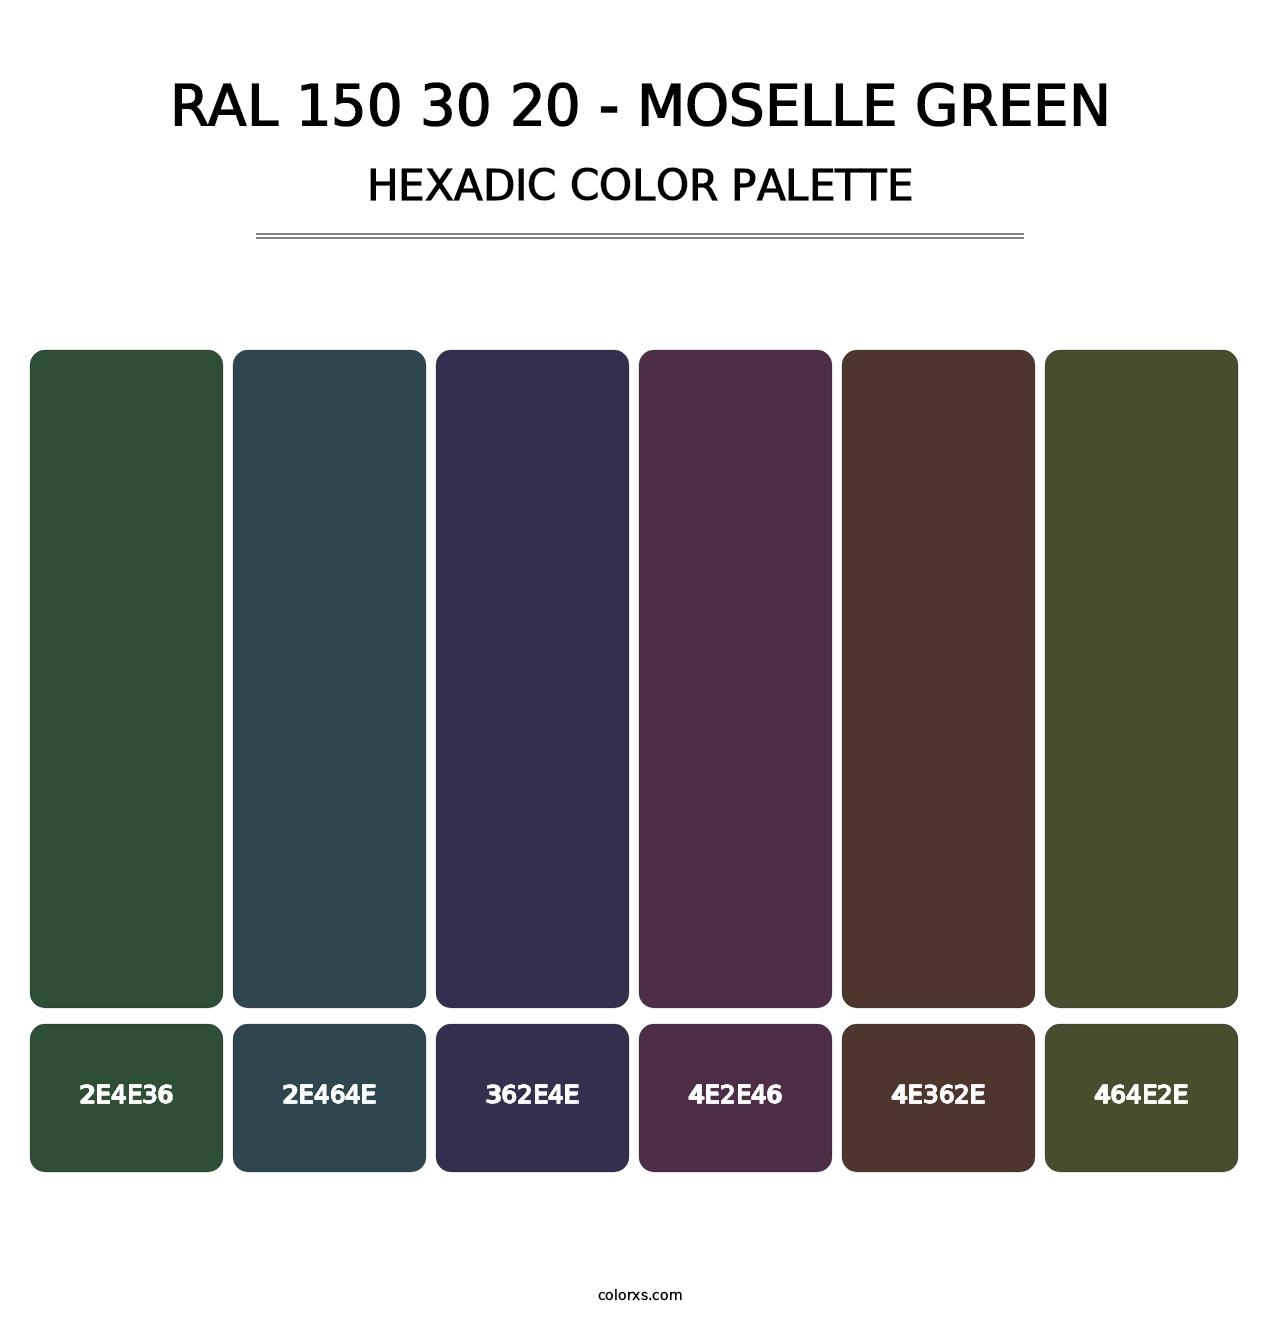 RAL 150 30 20 - Moselle Green - Hexadic Color Palette